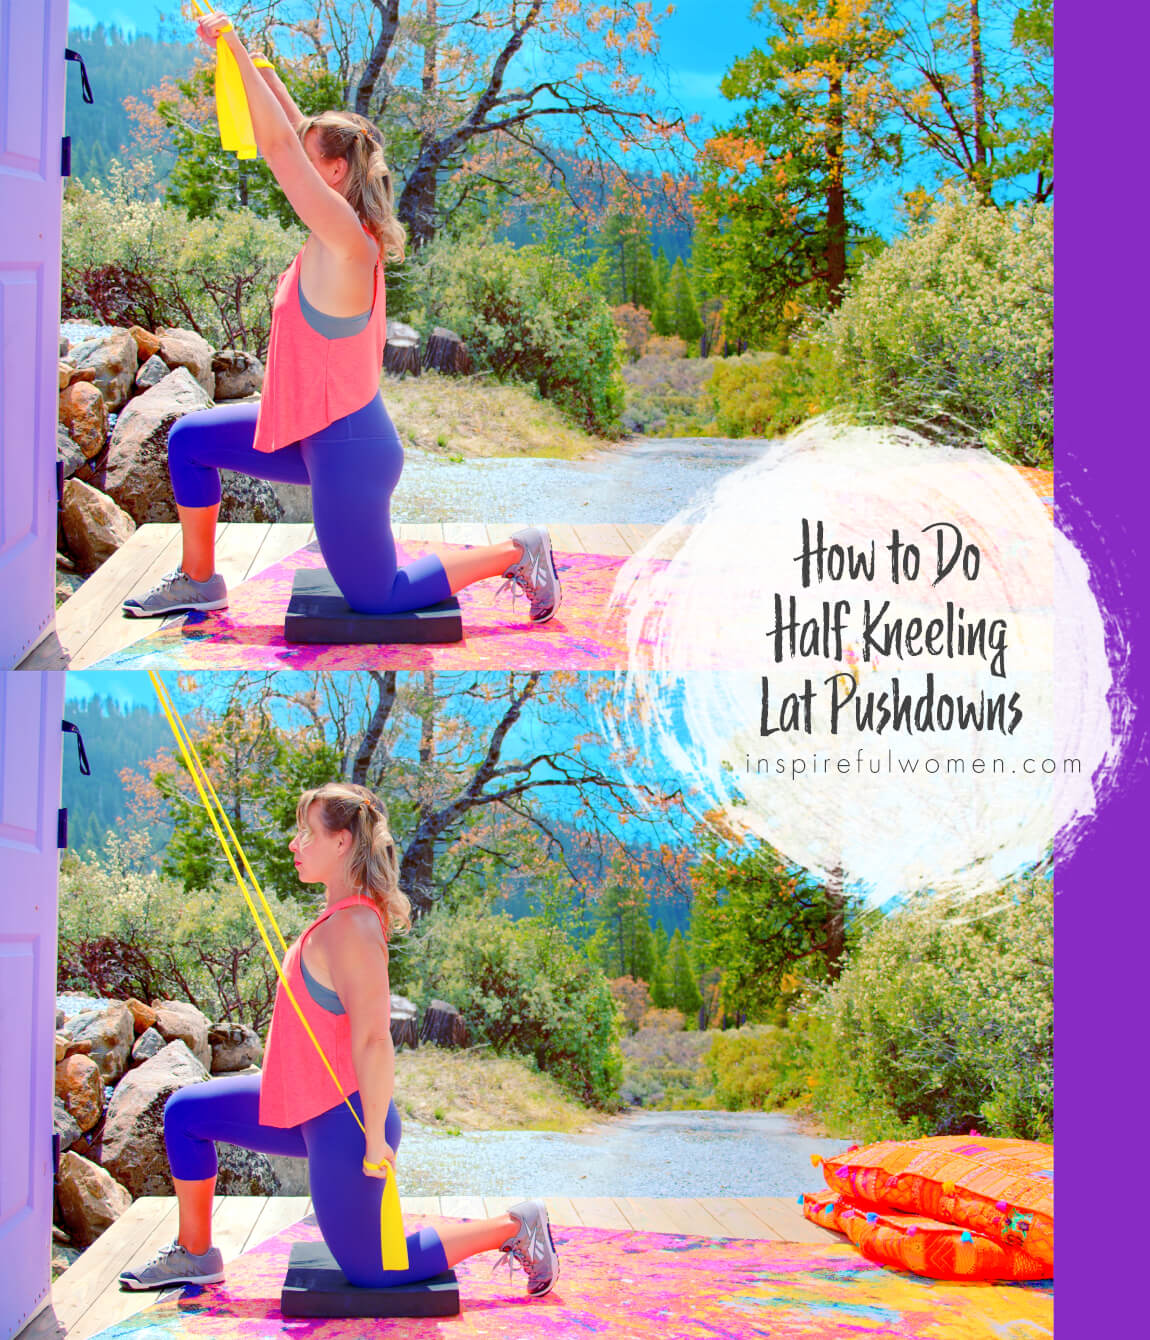 how-to-do-half-kneeling-straight-arm-lat-pushdowns-back-workout-at-home-for-women-40-plus